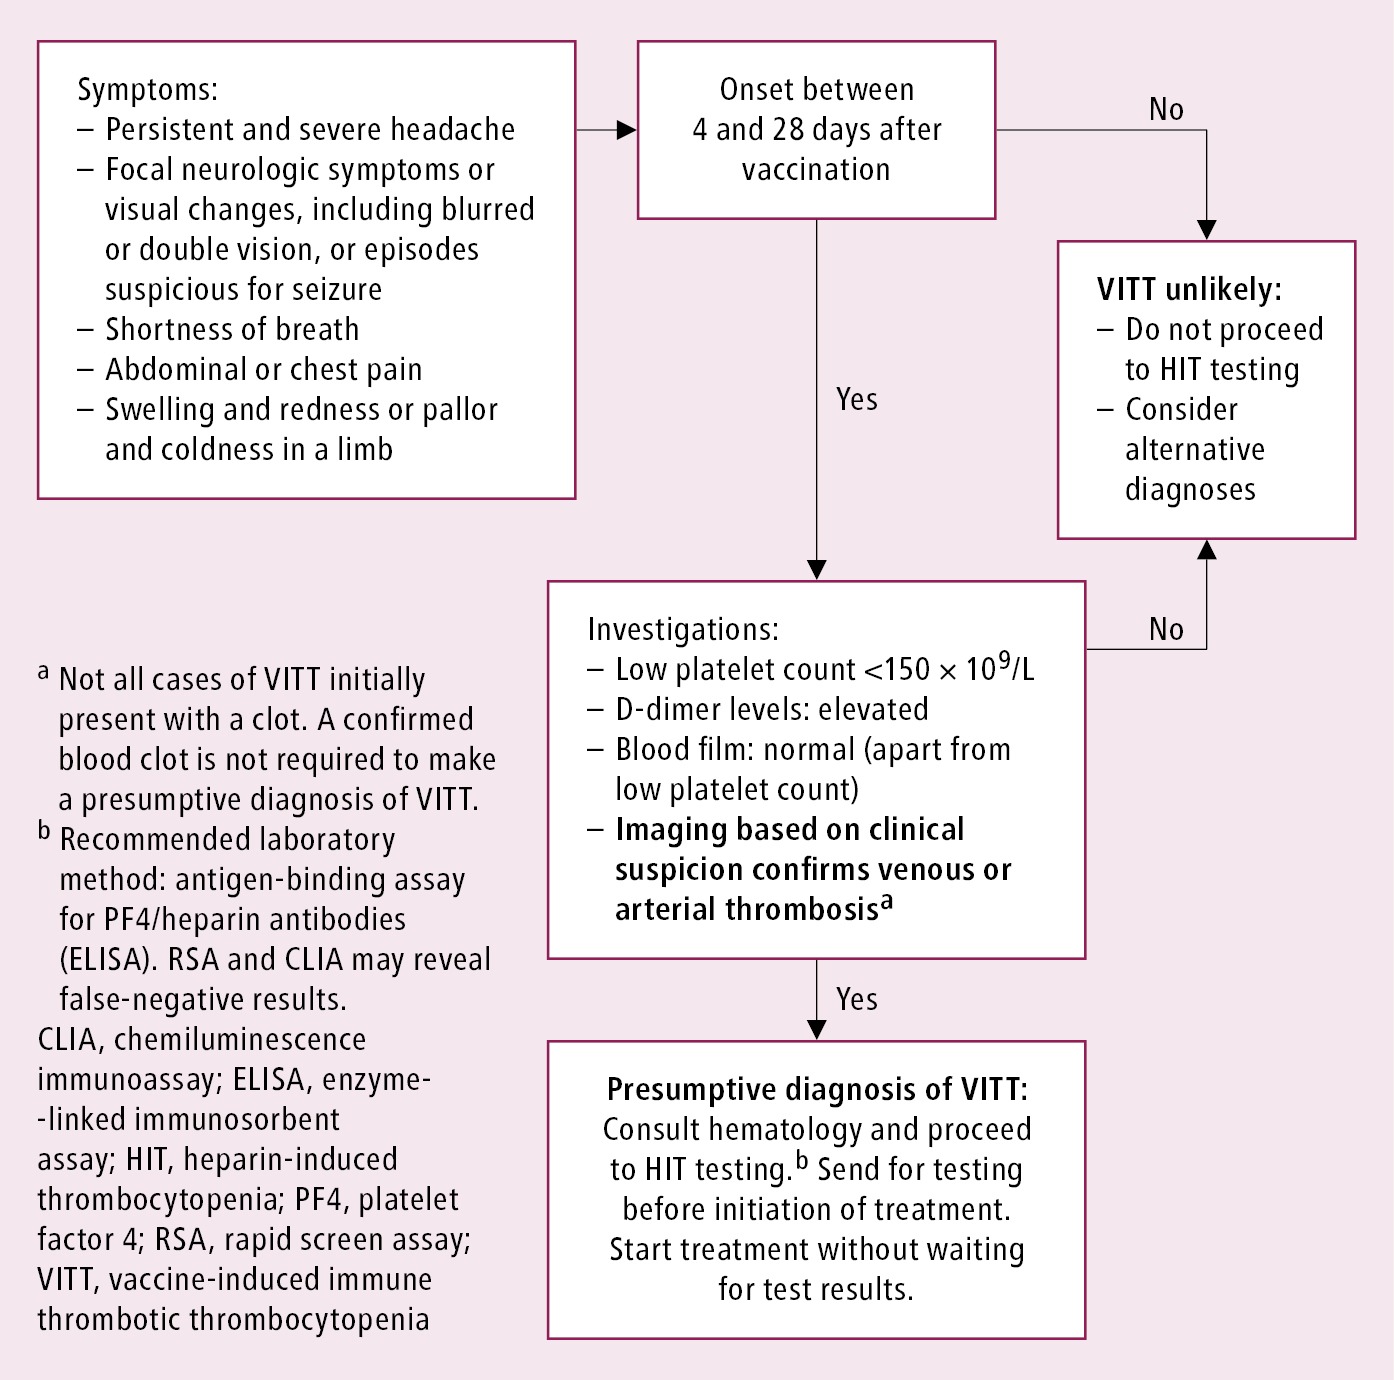 Figure 031_6793.  Management algorithm in patients with suspected vaccine-induced immune thrombotic thrombocytopenia.  Adapted from    https://thrombosiscanada.ca/clinicalguides/#    with permission of Thrombosis Canada.  